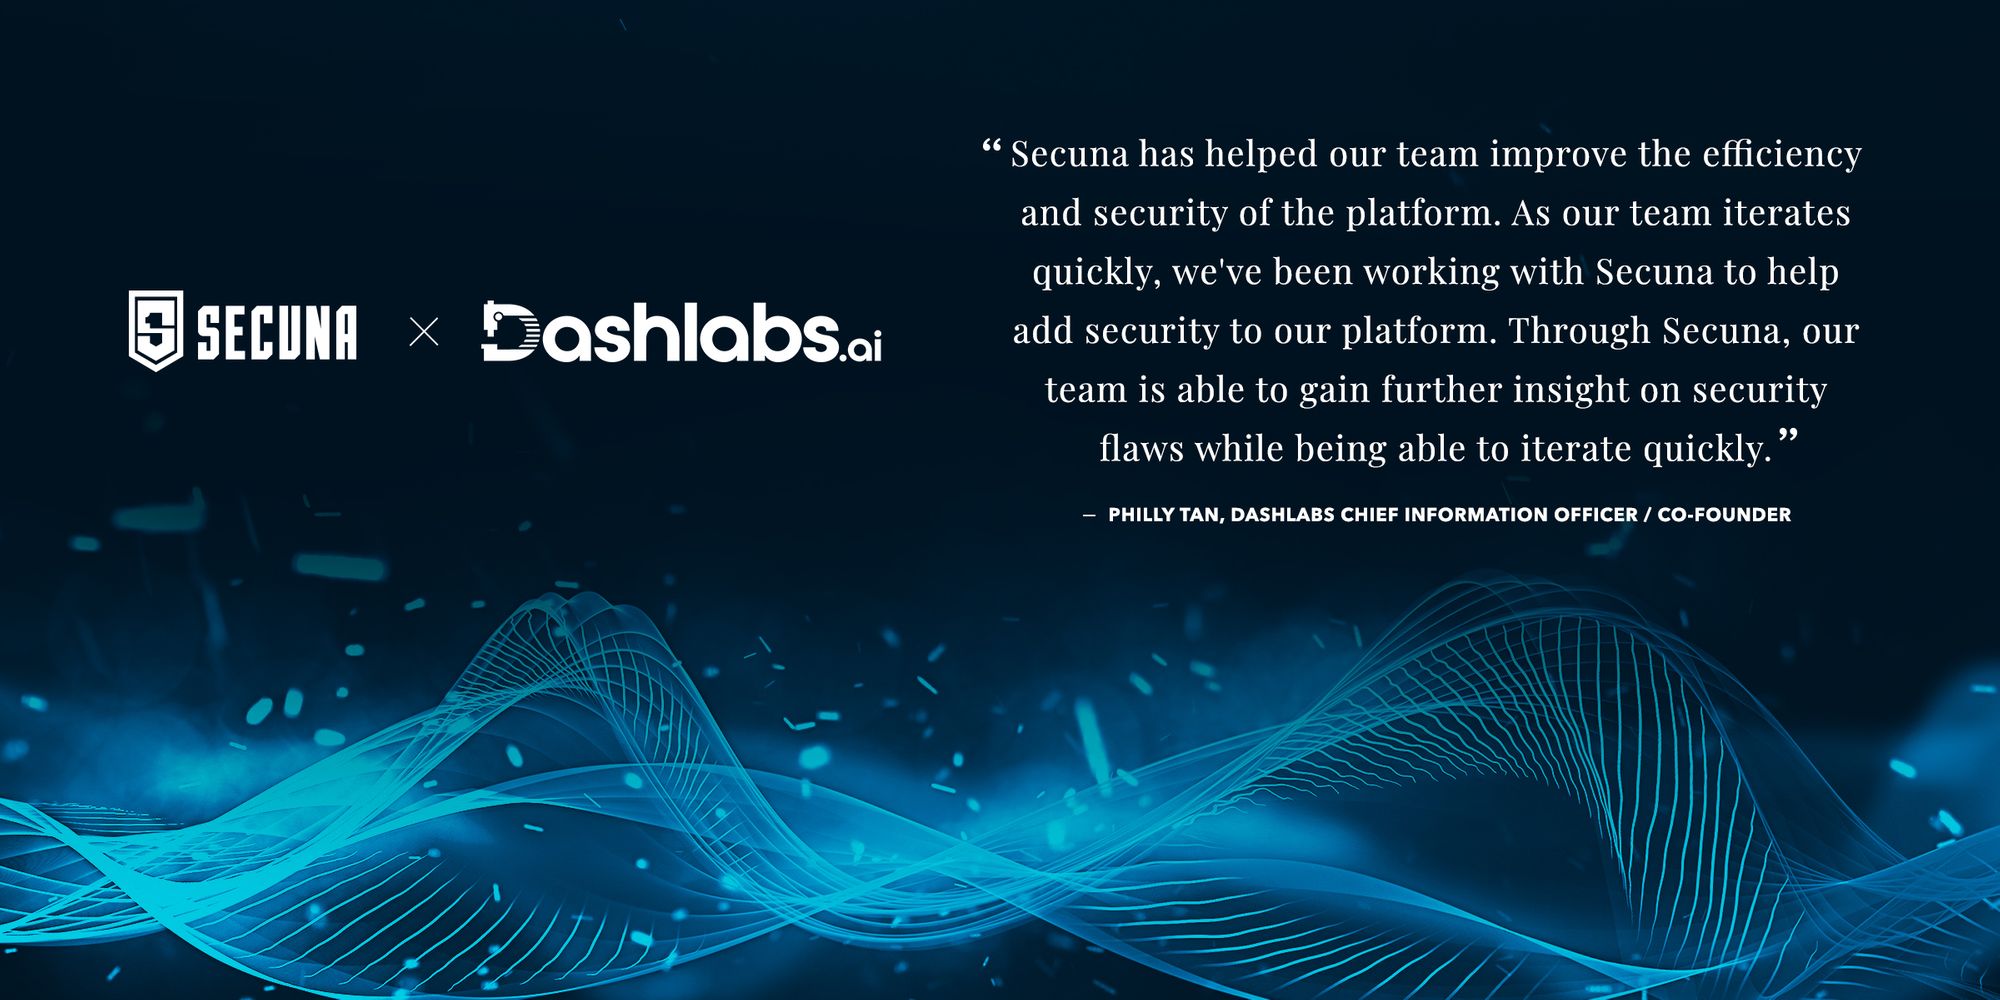 DASHLABS EMBRACES COMMUNITY OF ETHICAL AND TRUSTED HACKERS TO SECURE ITS PLATFORM